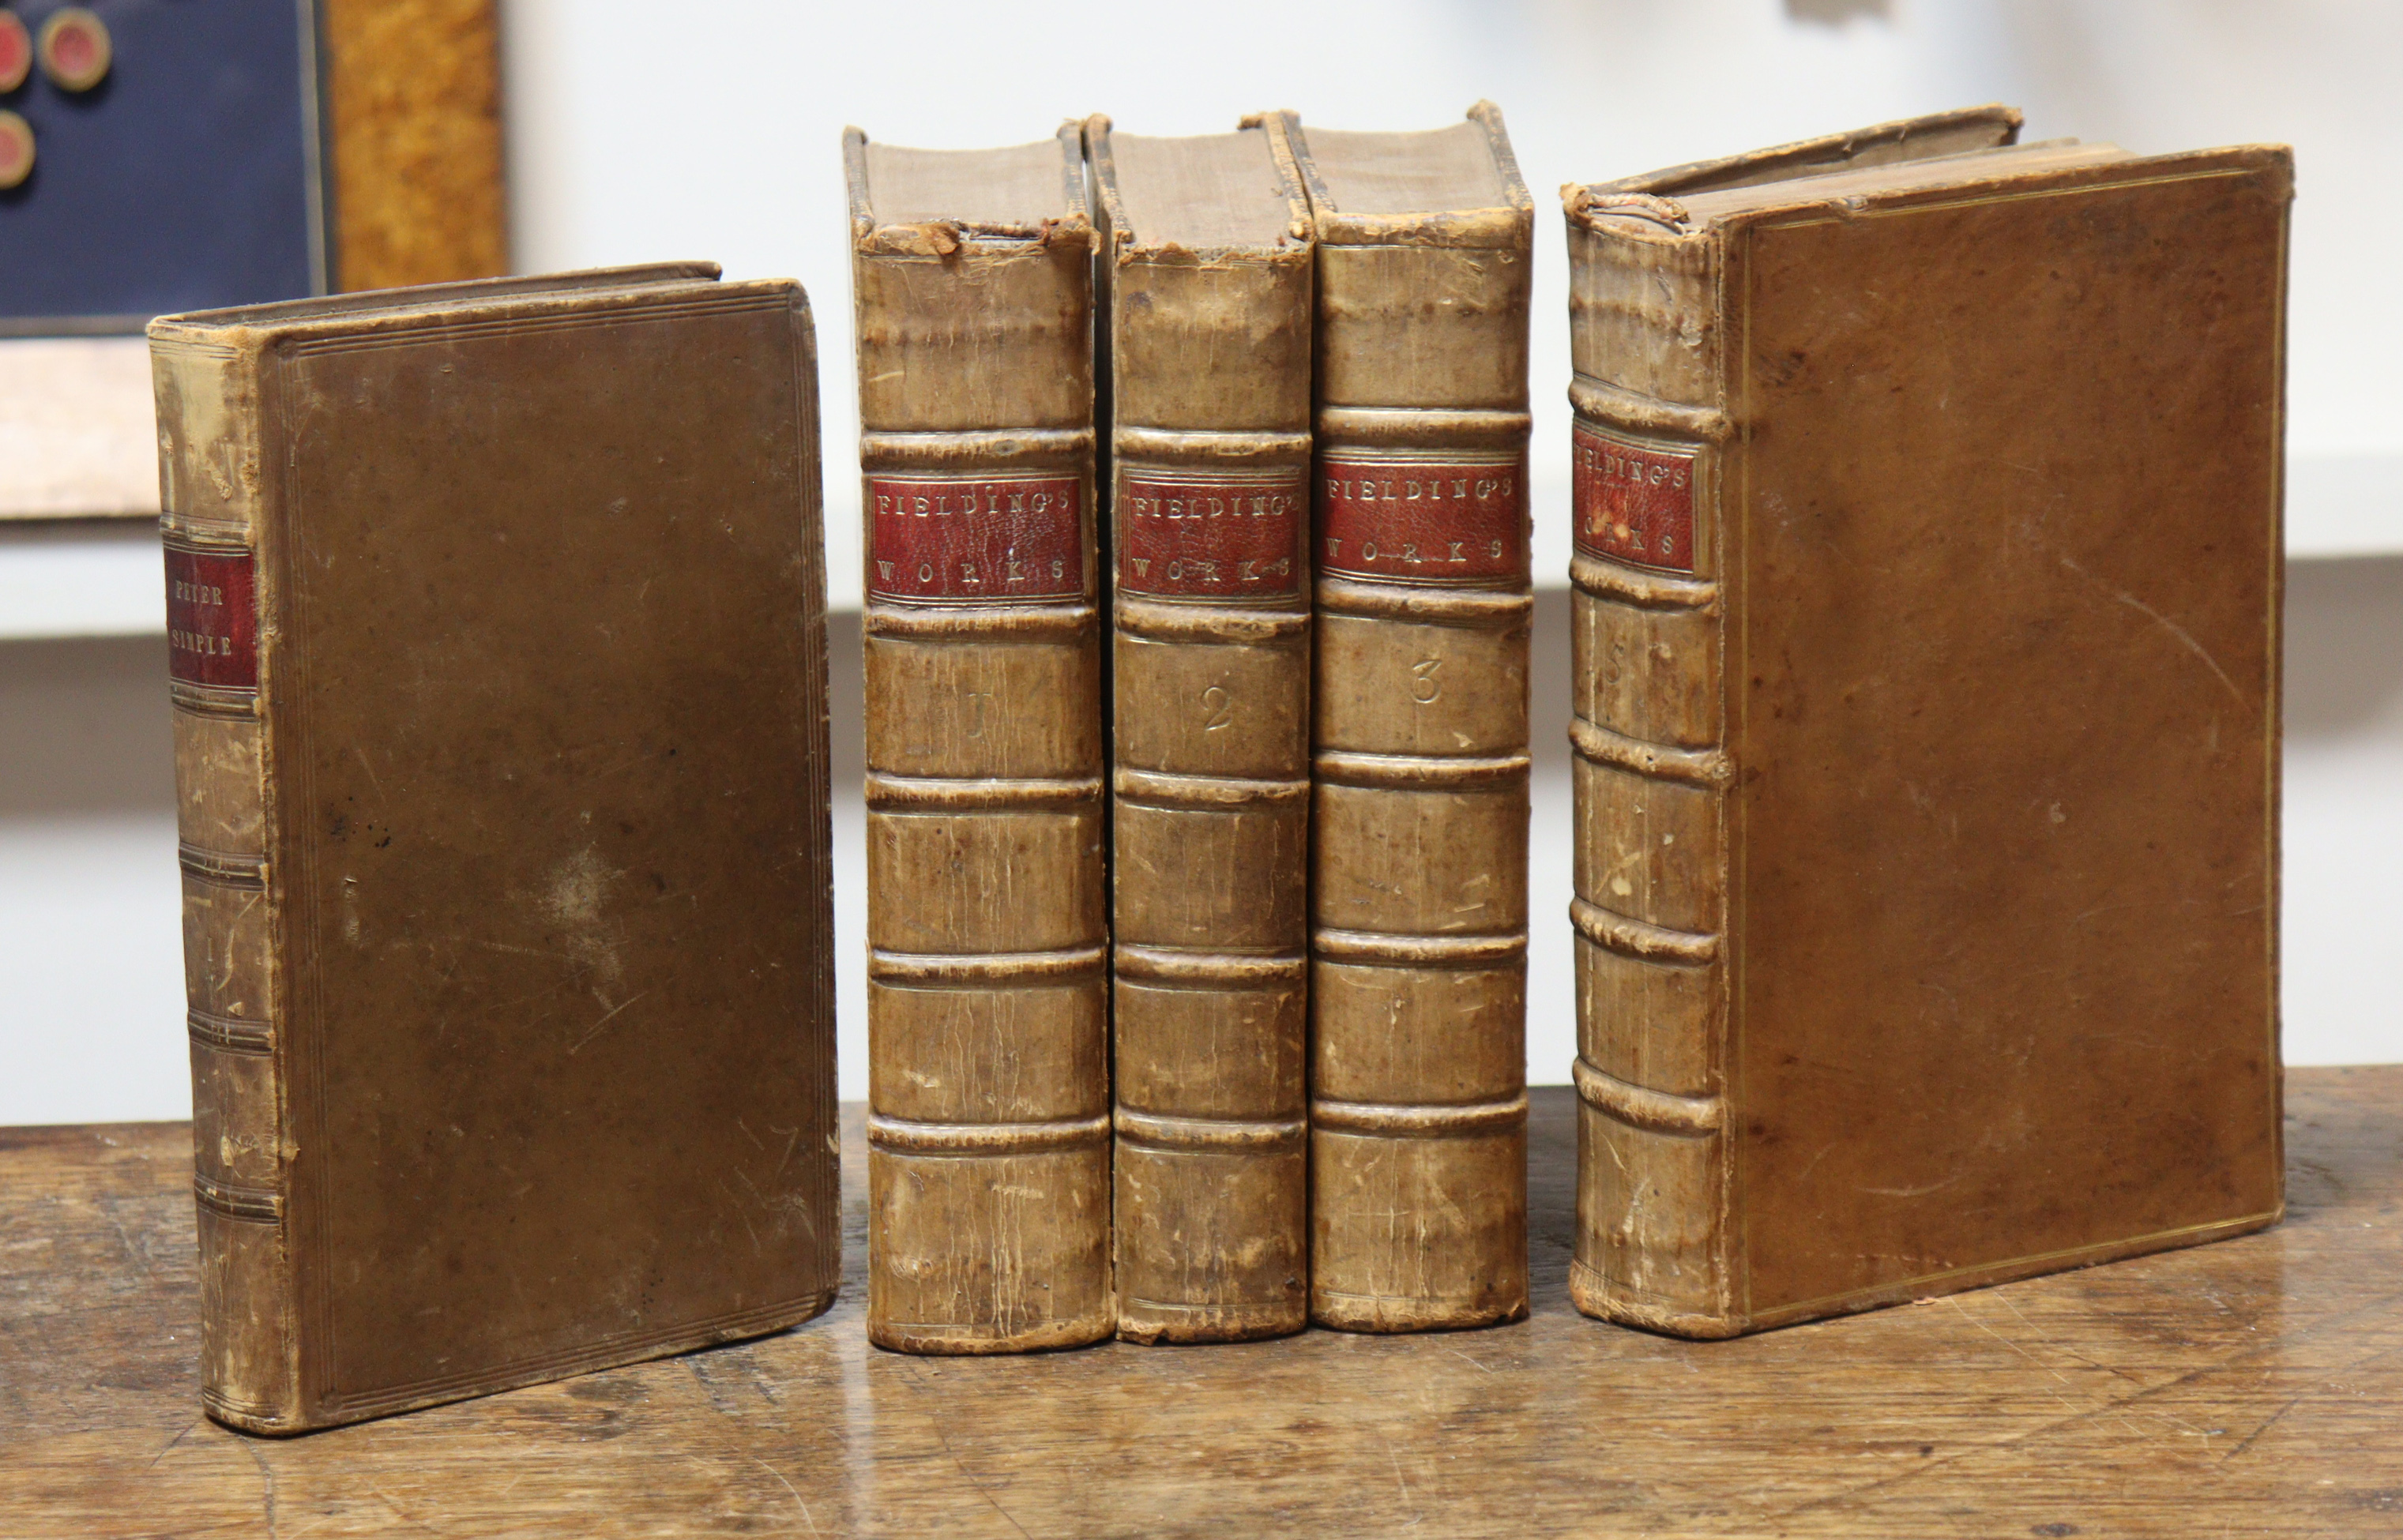 The Works of Henry Fielding, Esq., vols I, II, III & V (of 8), Published 1757, London by A Millar, - Image 2 of 4